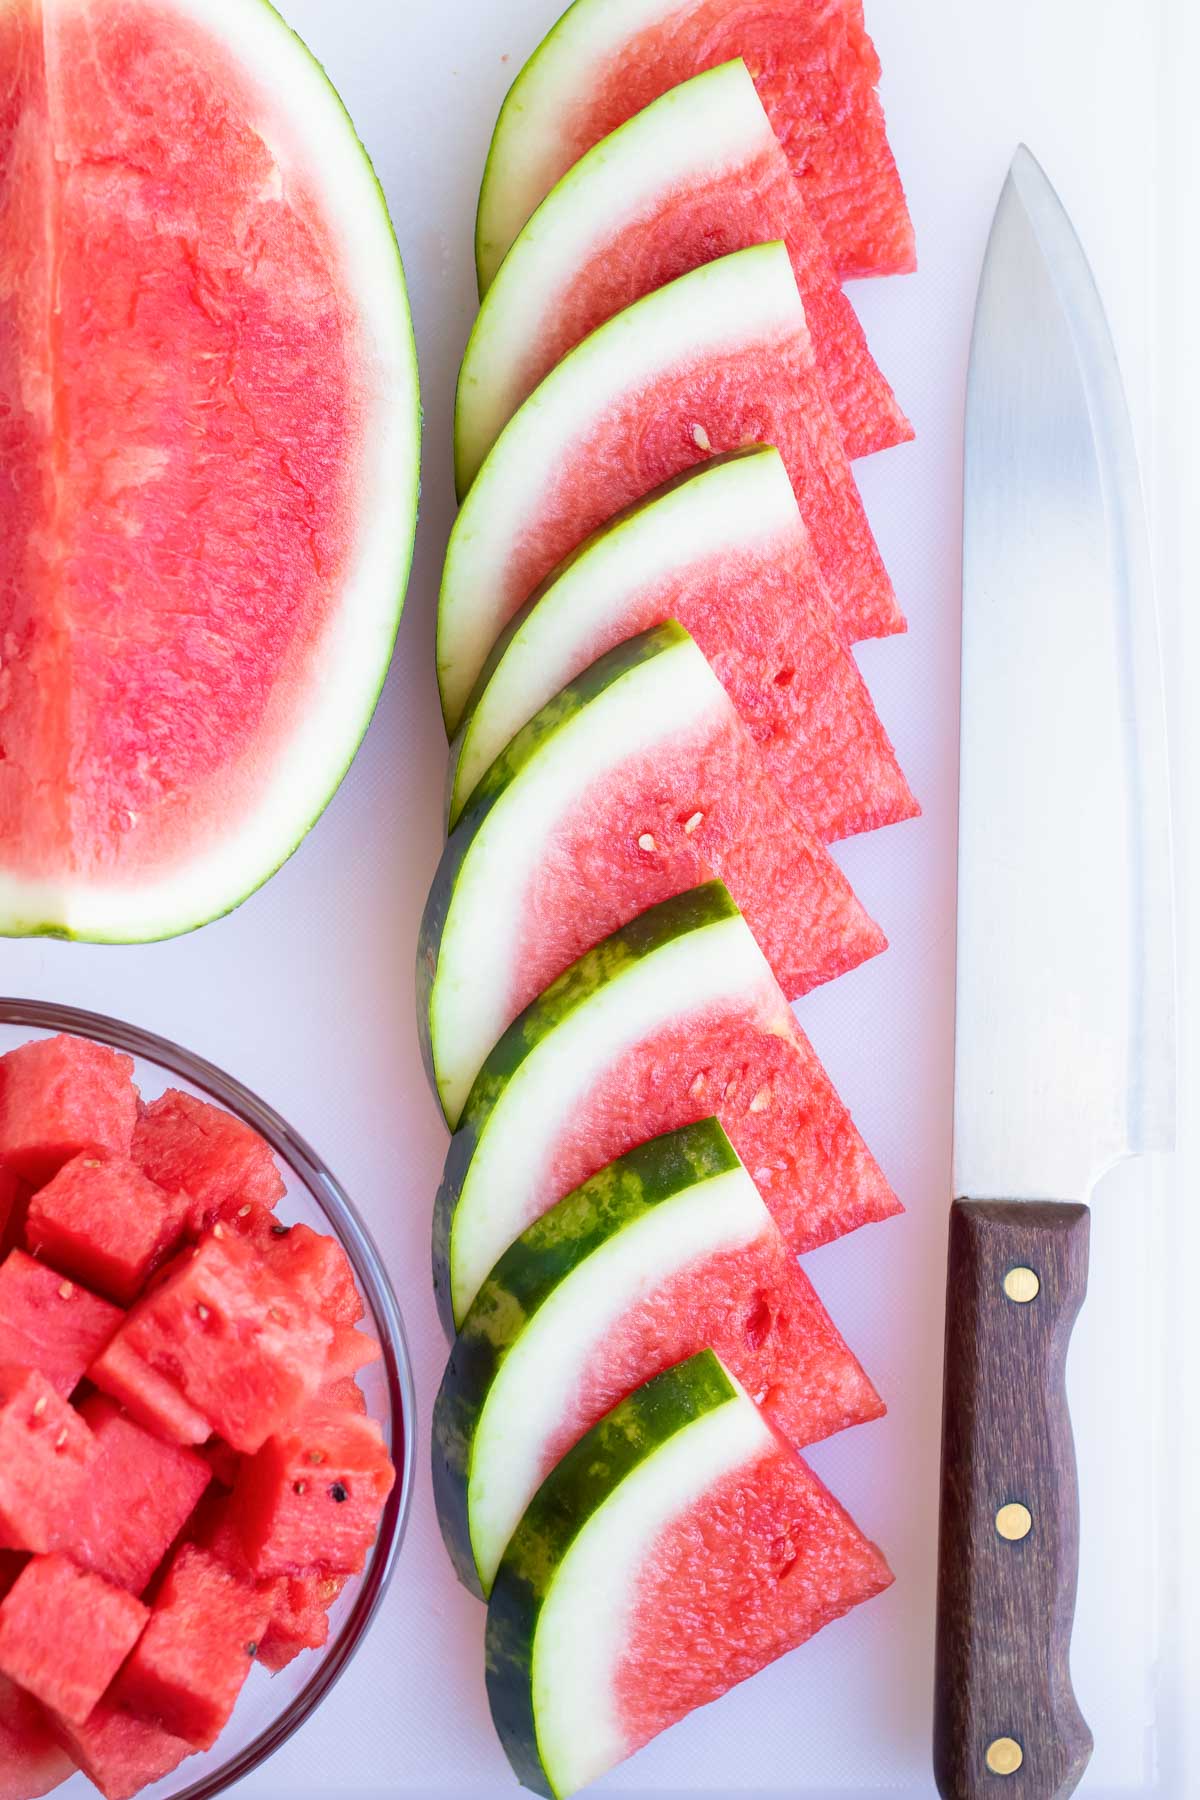 Watermelon wedges in a row on a cutting board next to a knife.